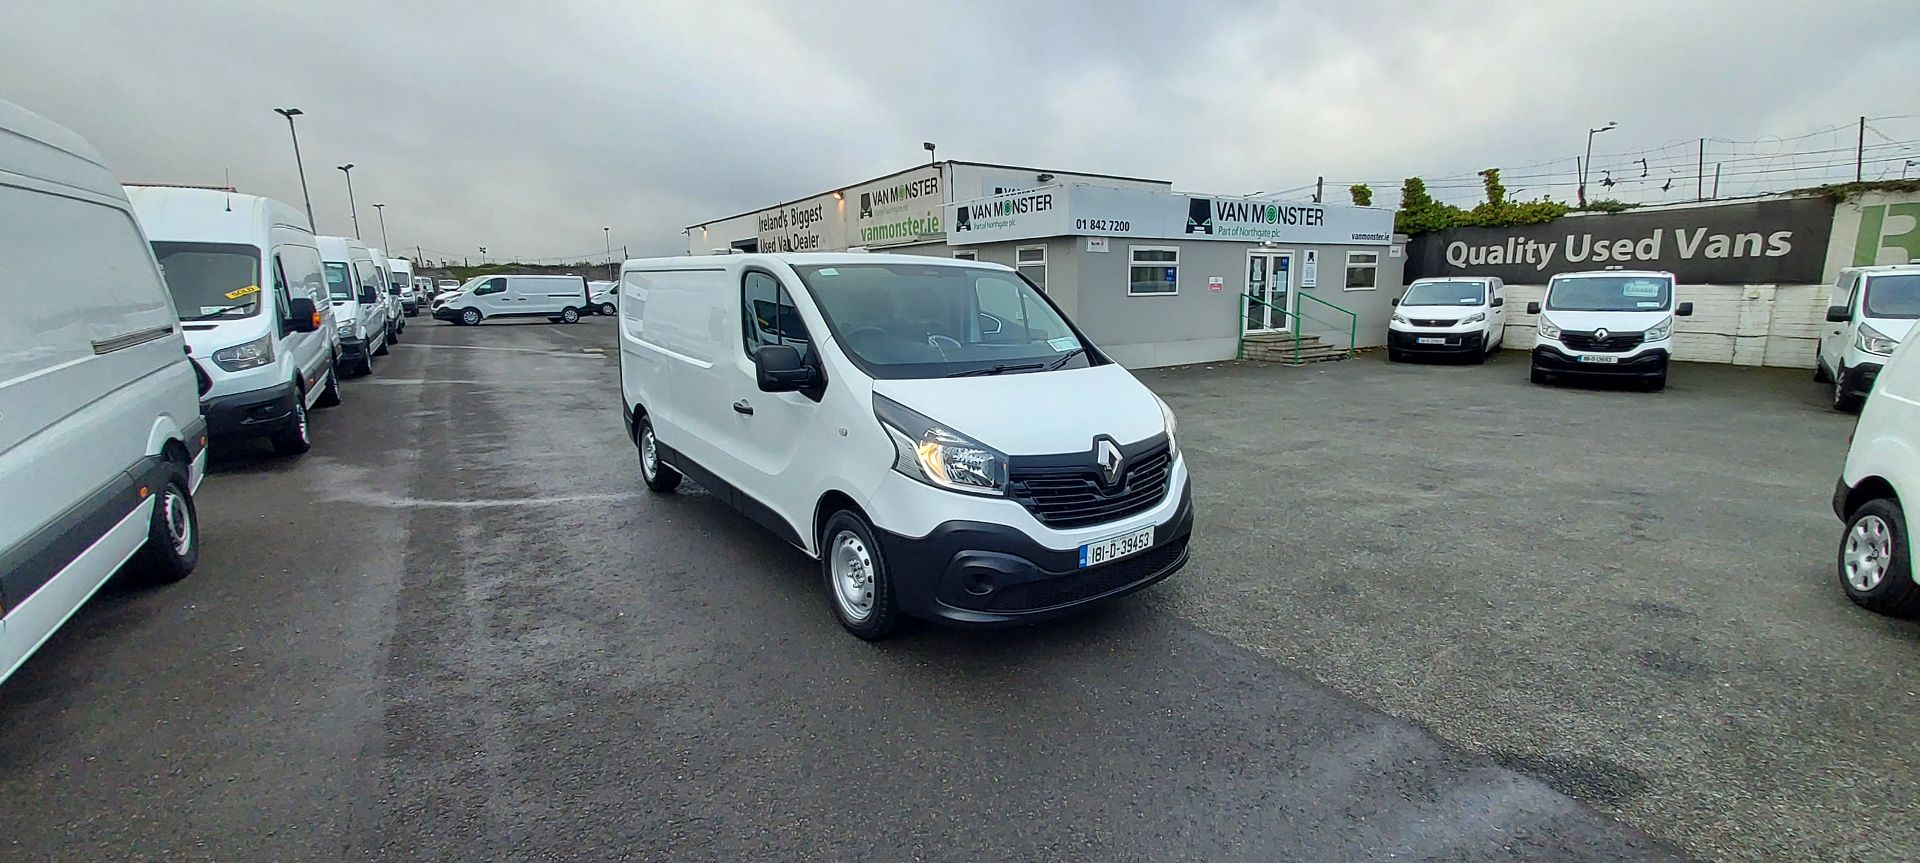 2018 Renault Trafic LL29 DCI 120 Business 3DR (181D39453) Image 1